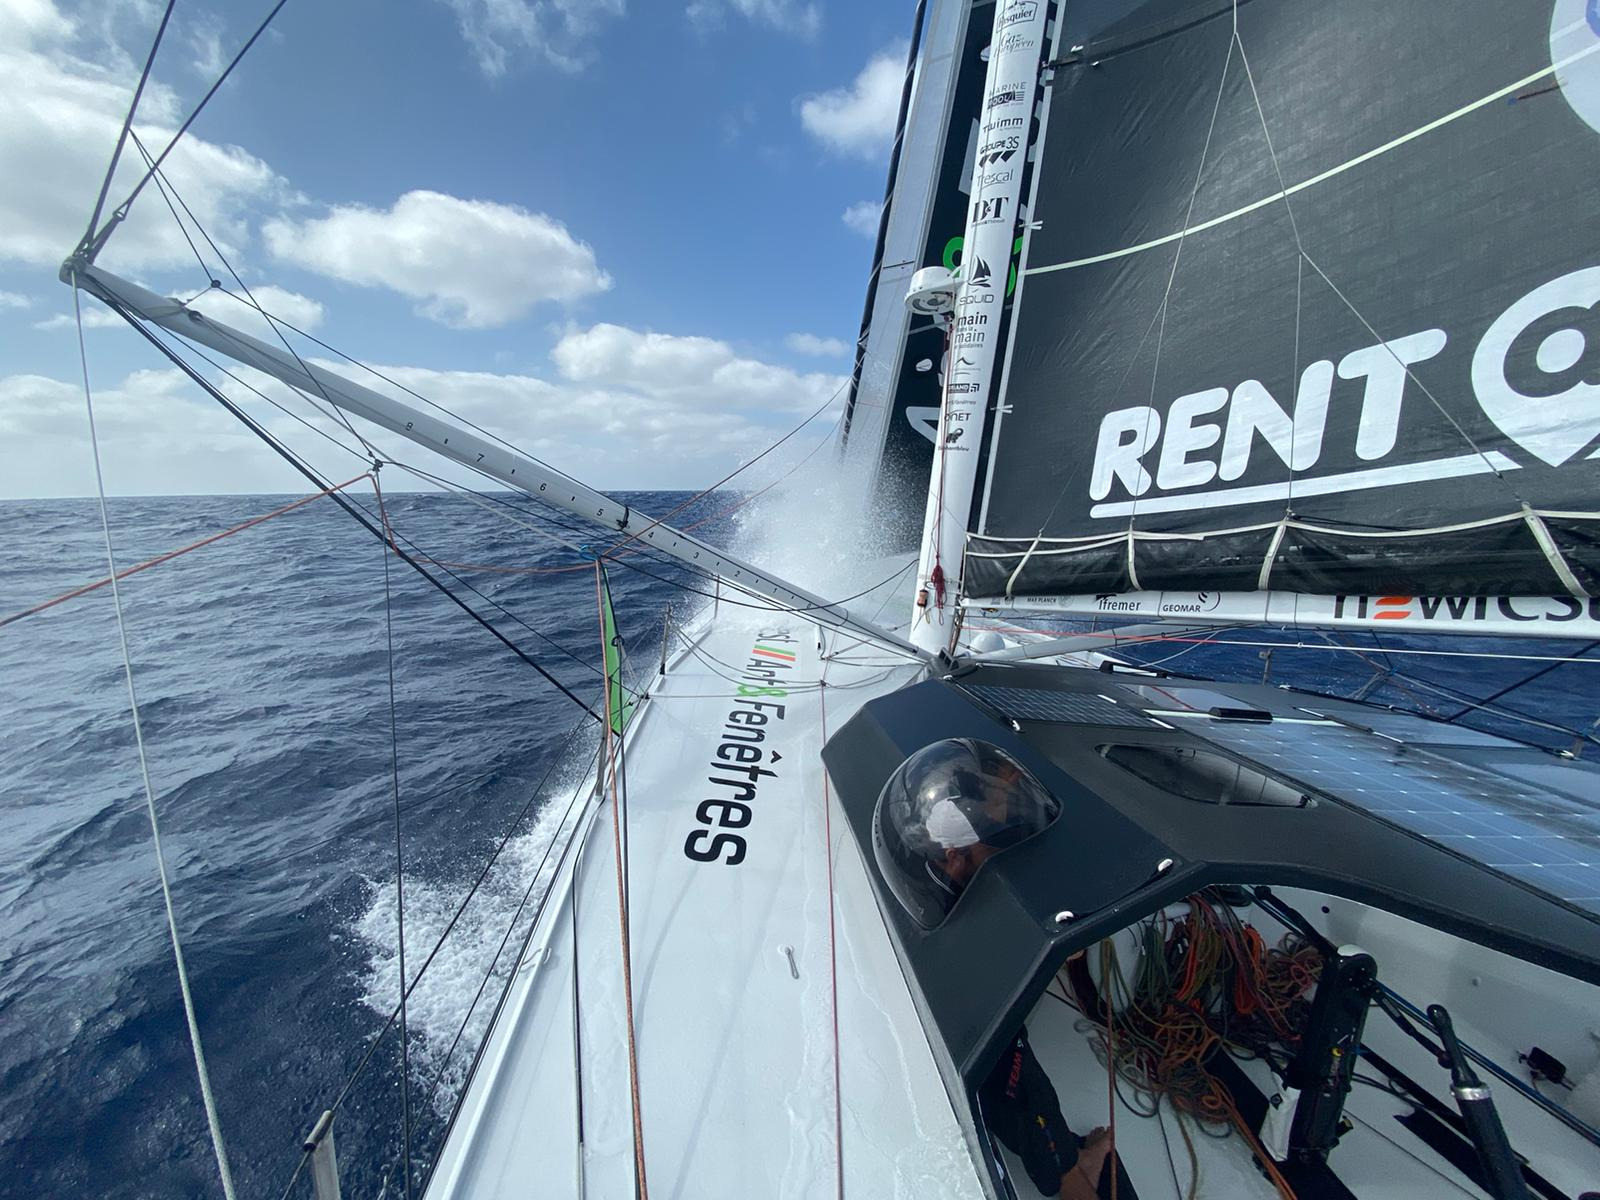  IMOCA Open 60, Class 40, Multi 50  Transat Jacques Vabre  Day 8, Thomson/McDonald GBR abandon after collision with flotsam 